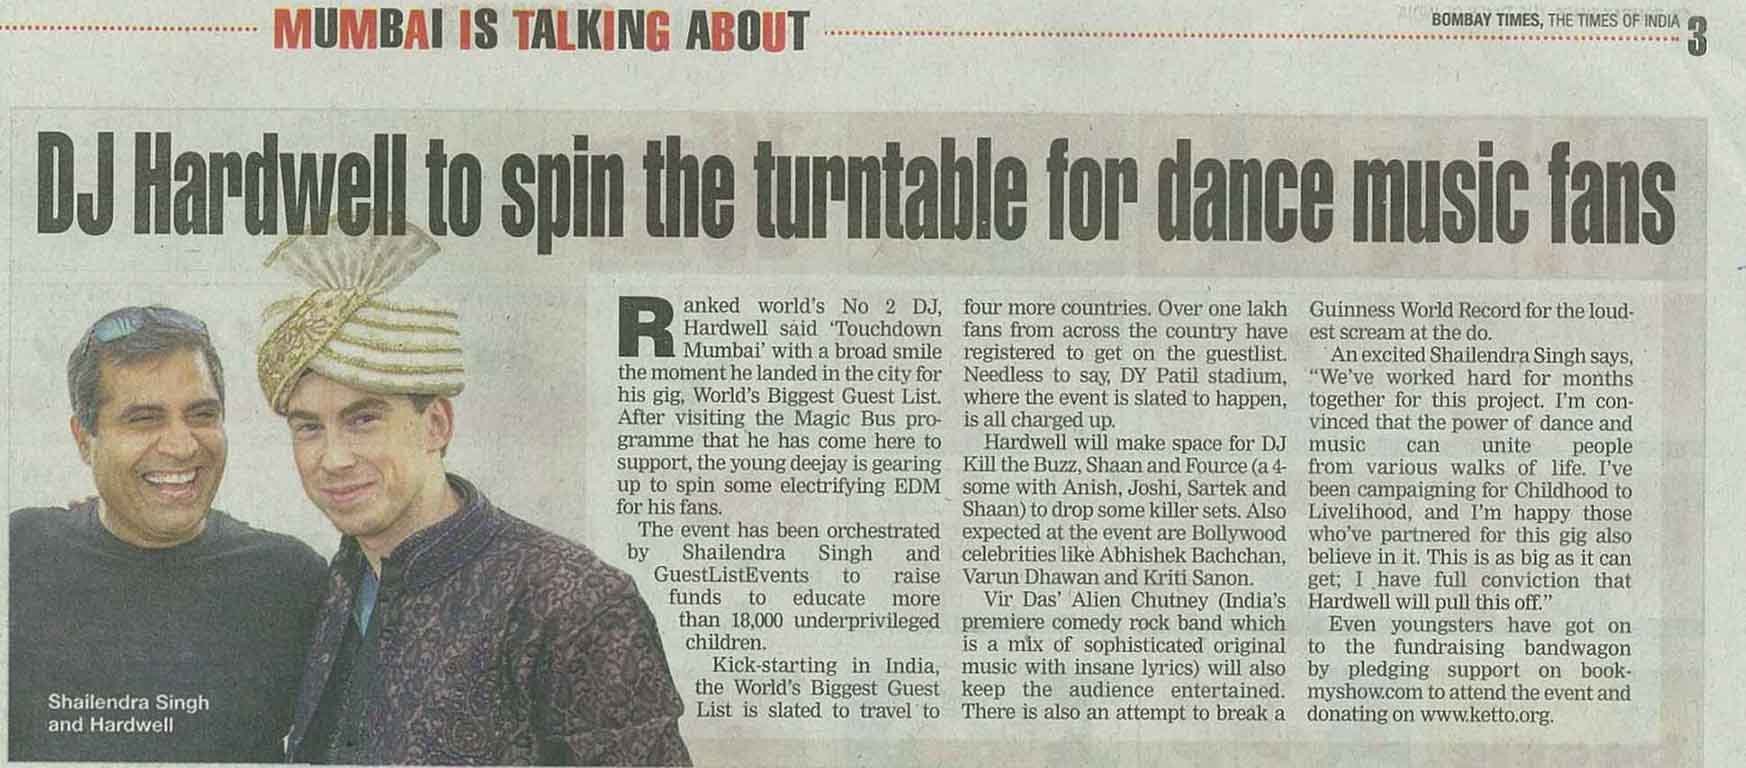 An excited Shailendra Singh says, "I'm convinced that the power of dance music can unite the world."